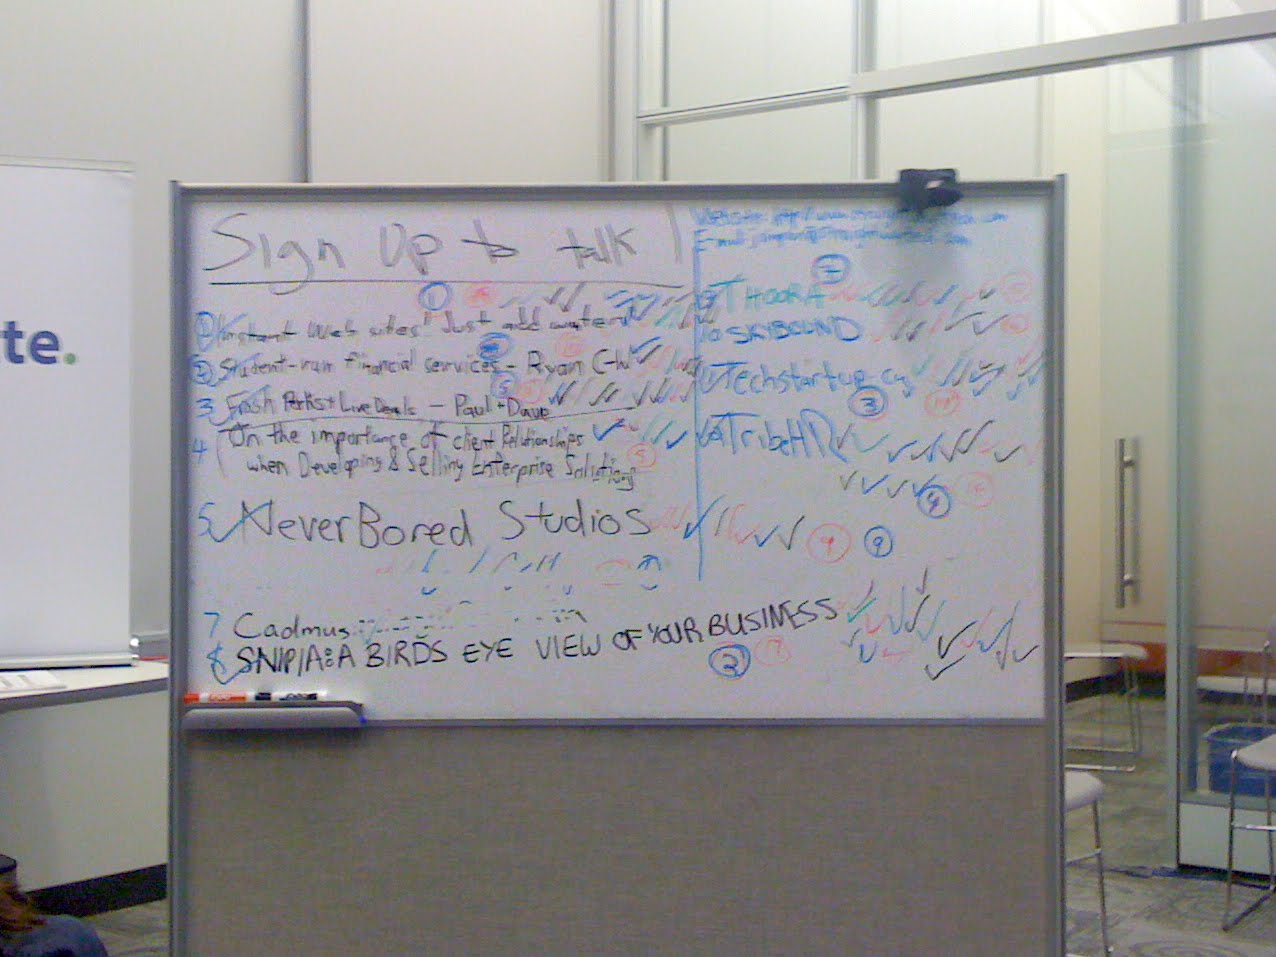 A whiteboard with messy notes